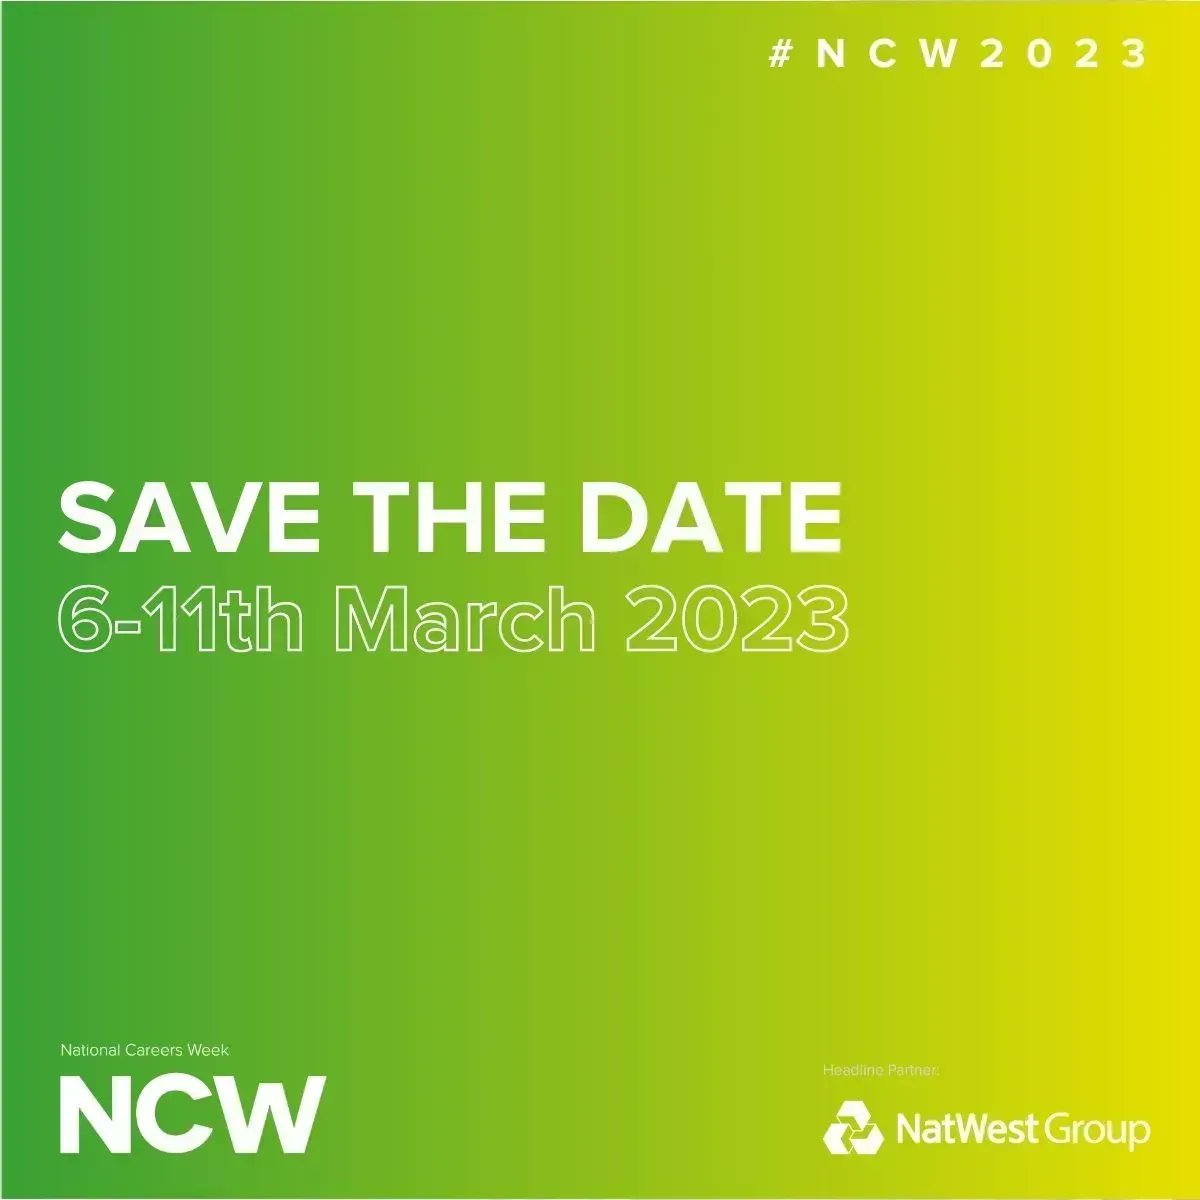 #NationalCareerWeek 2023.

6 - 11th March 2023.

#NCW2023